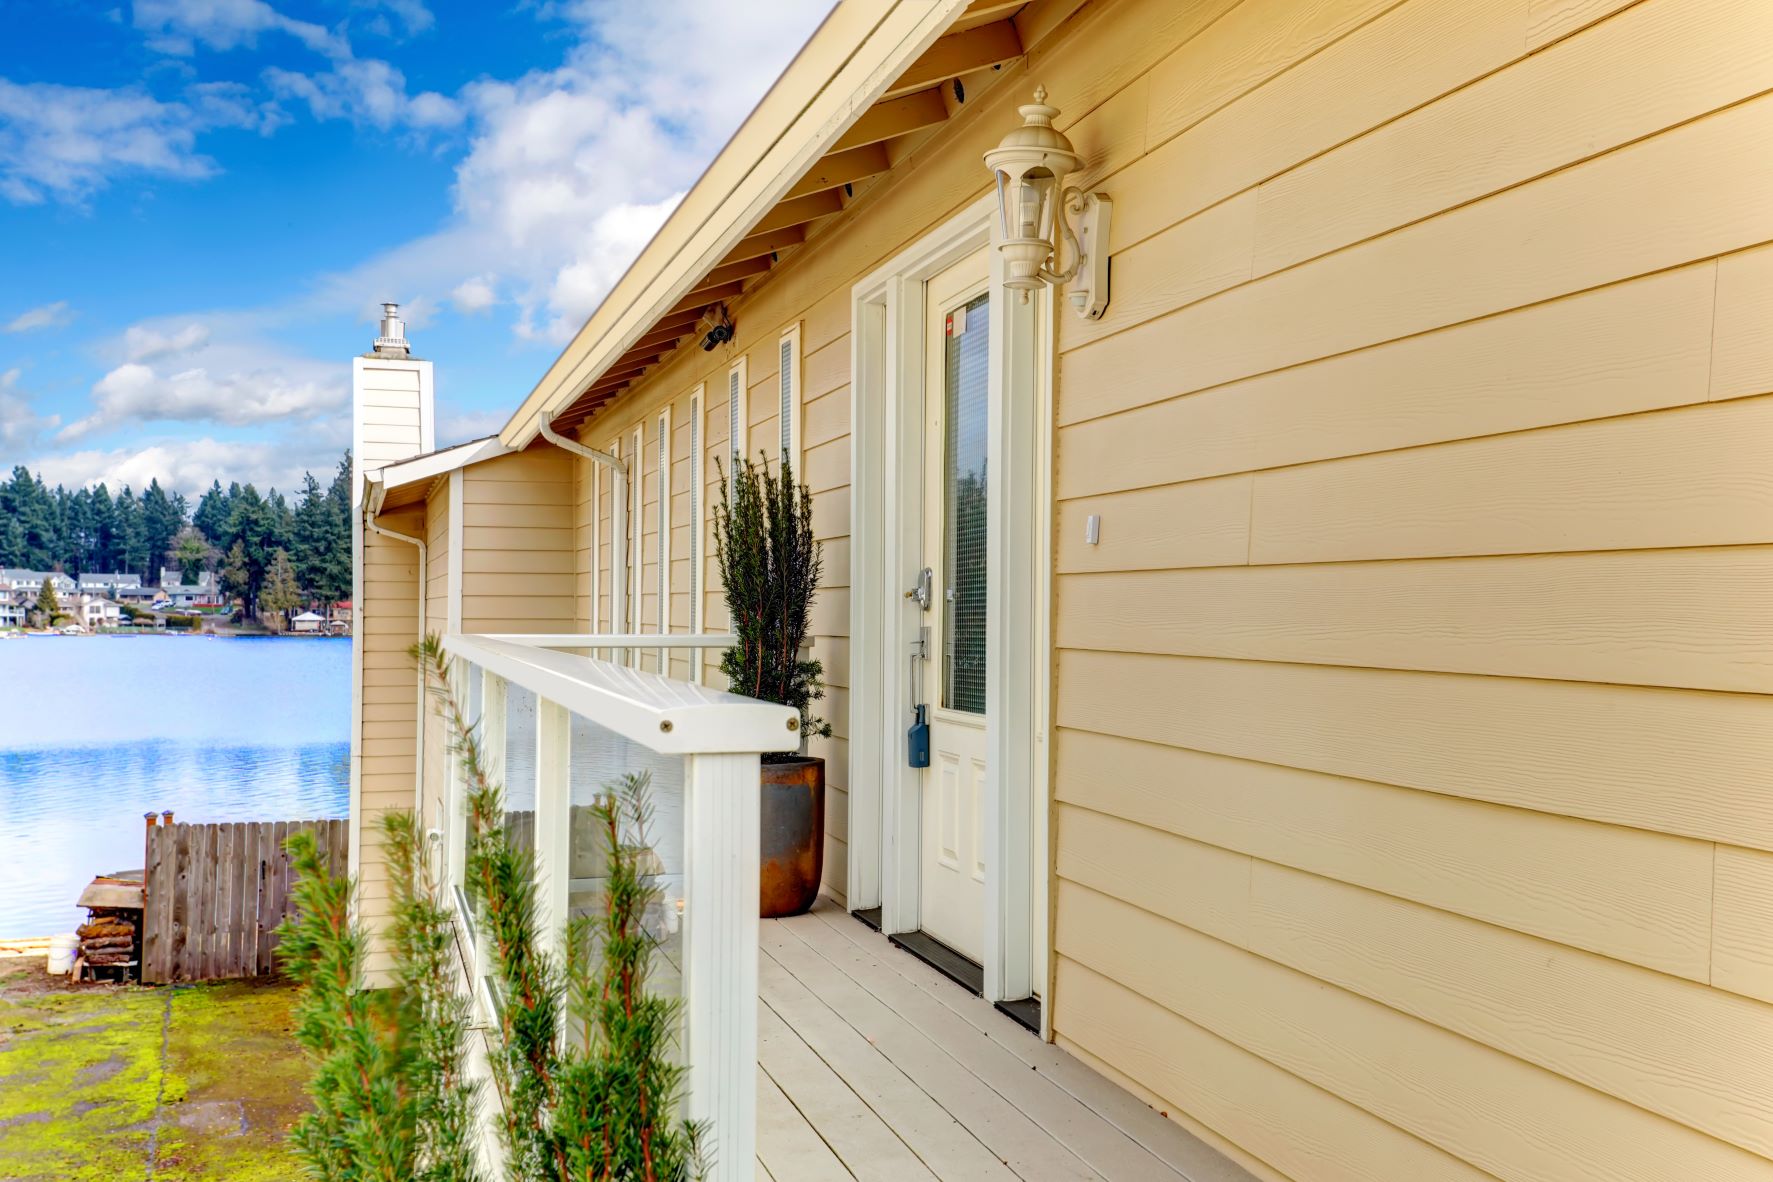 Importance of Roofing and Siding Considerations When Investing in an HOA Property